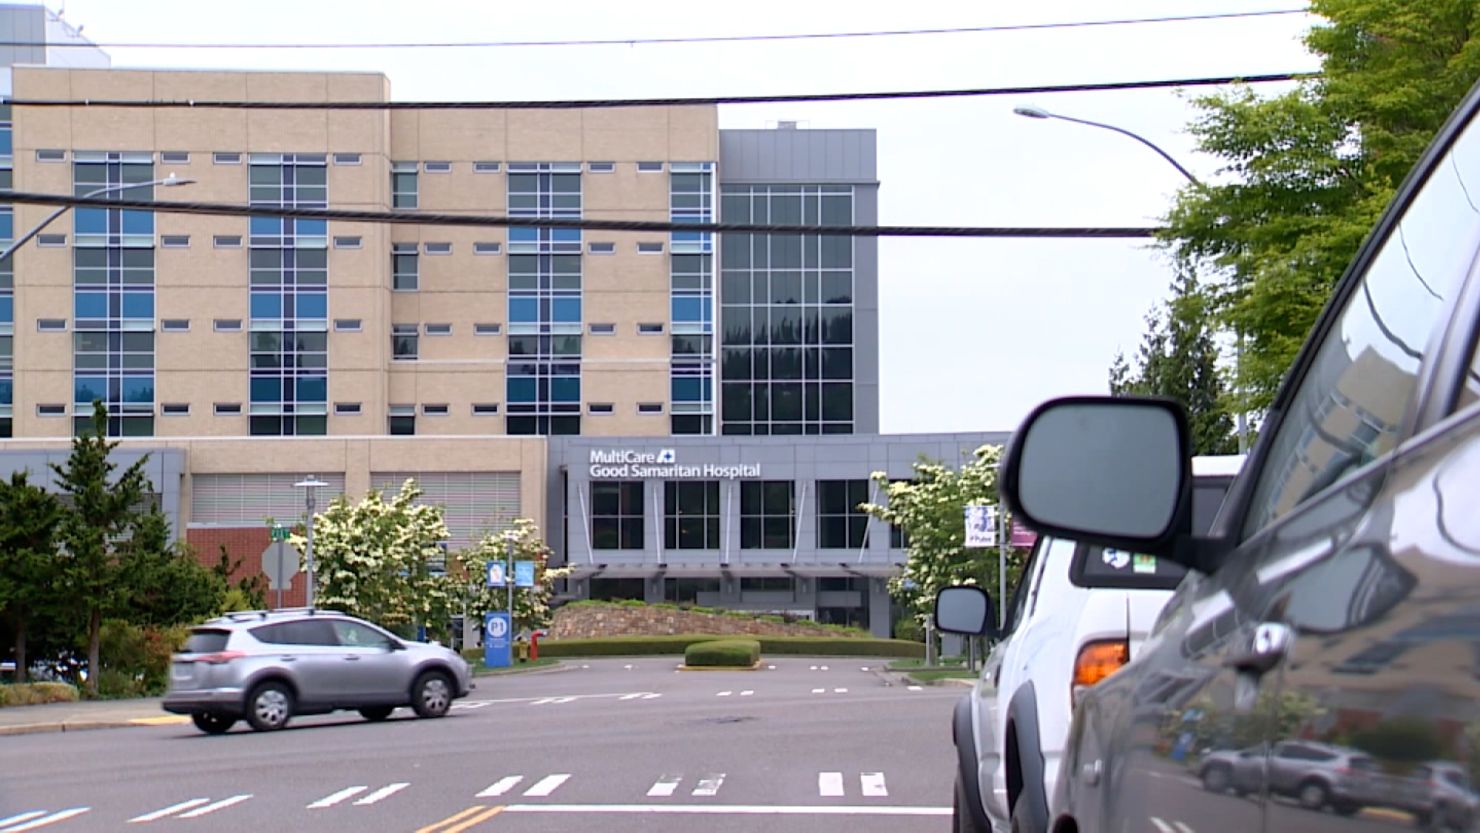 The child was rushed inside Good Samaritan Hospital in Puyallup, Washington, but couldn't be revived, police said.